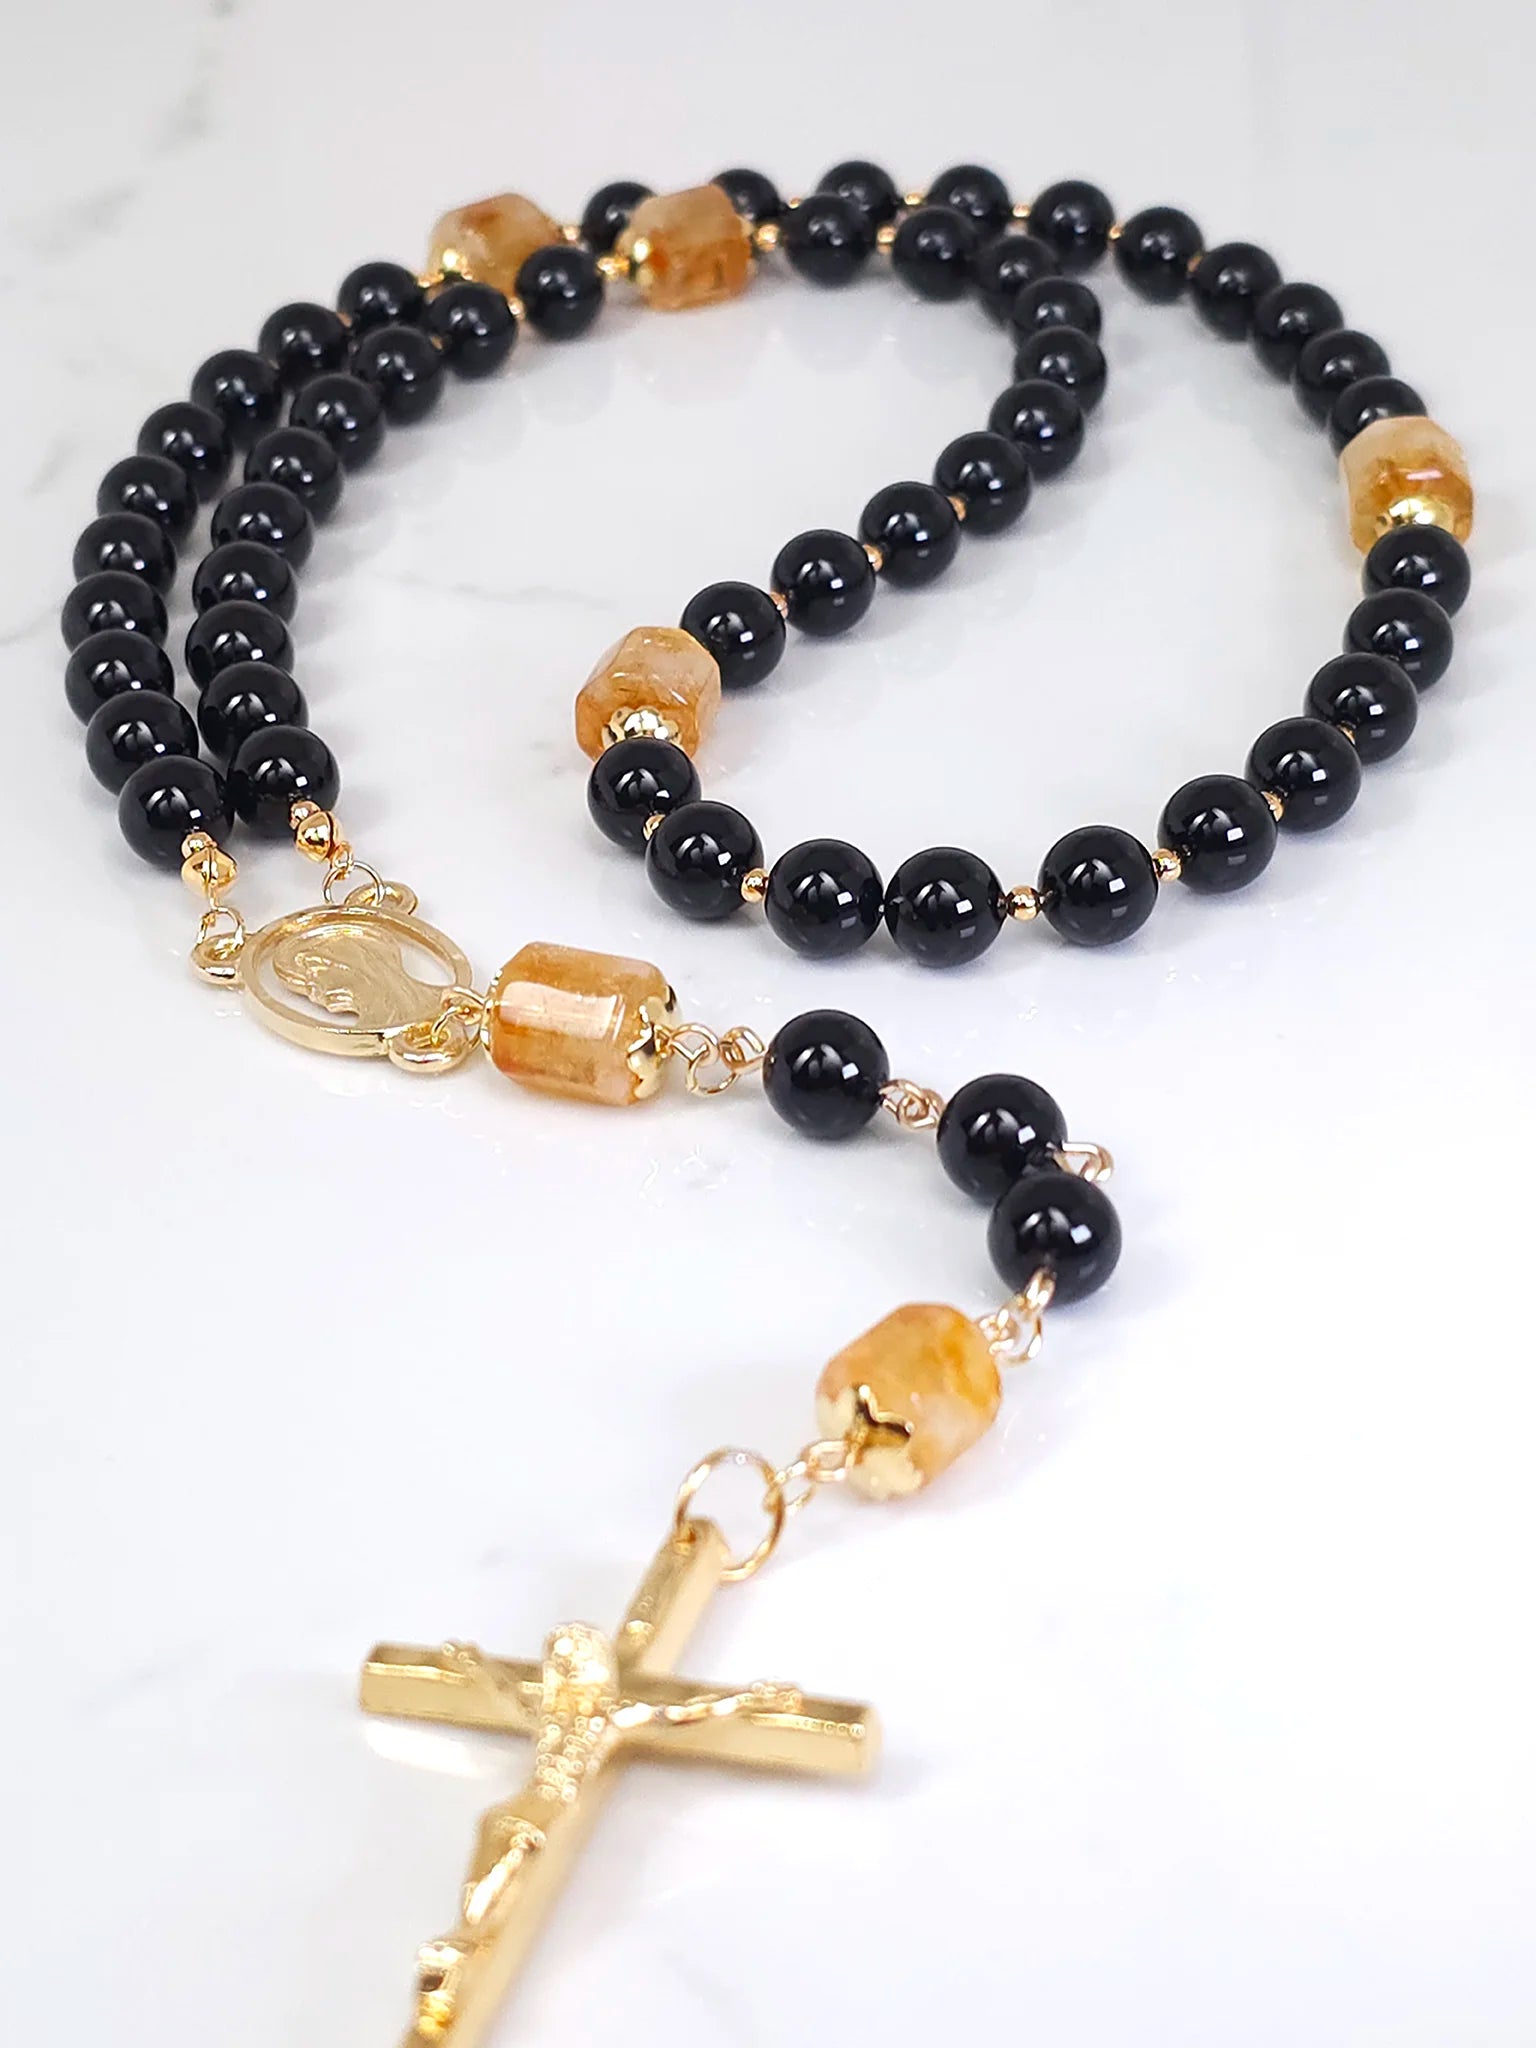 Unique rosary made from Black Onyx and Golden Citrine, accentuated by gold-filled bead caps, showcased on a white table.